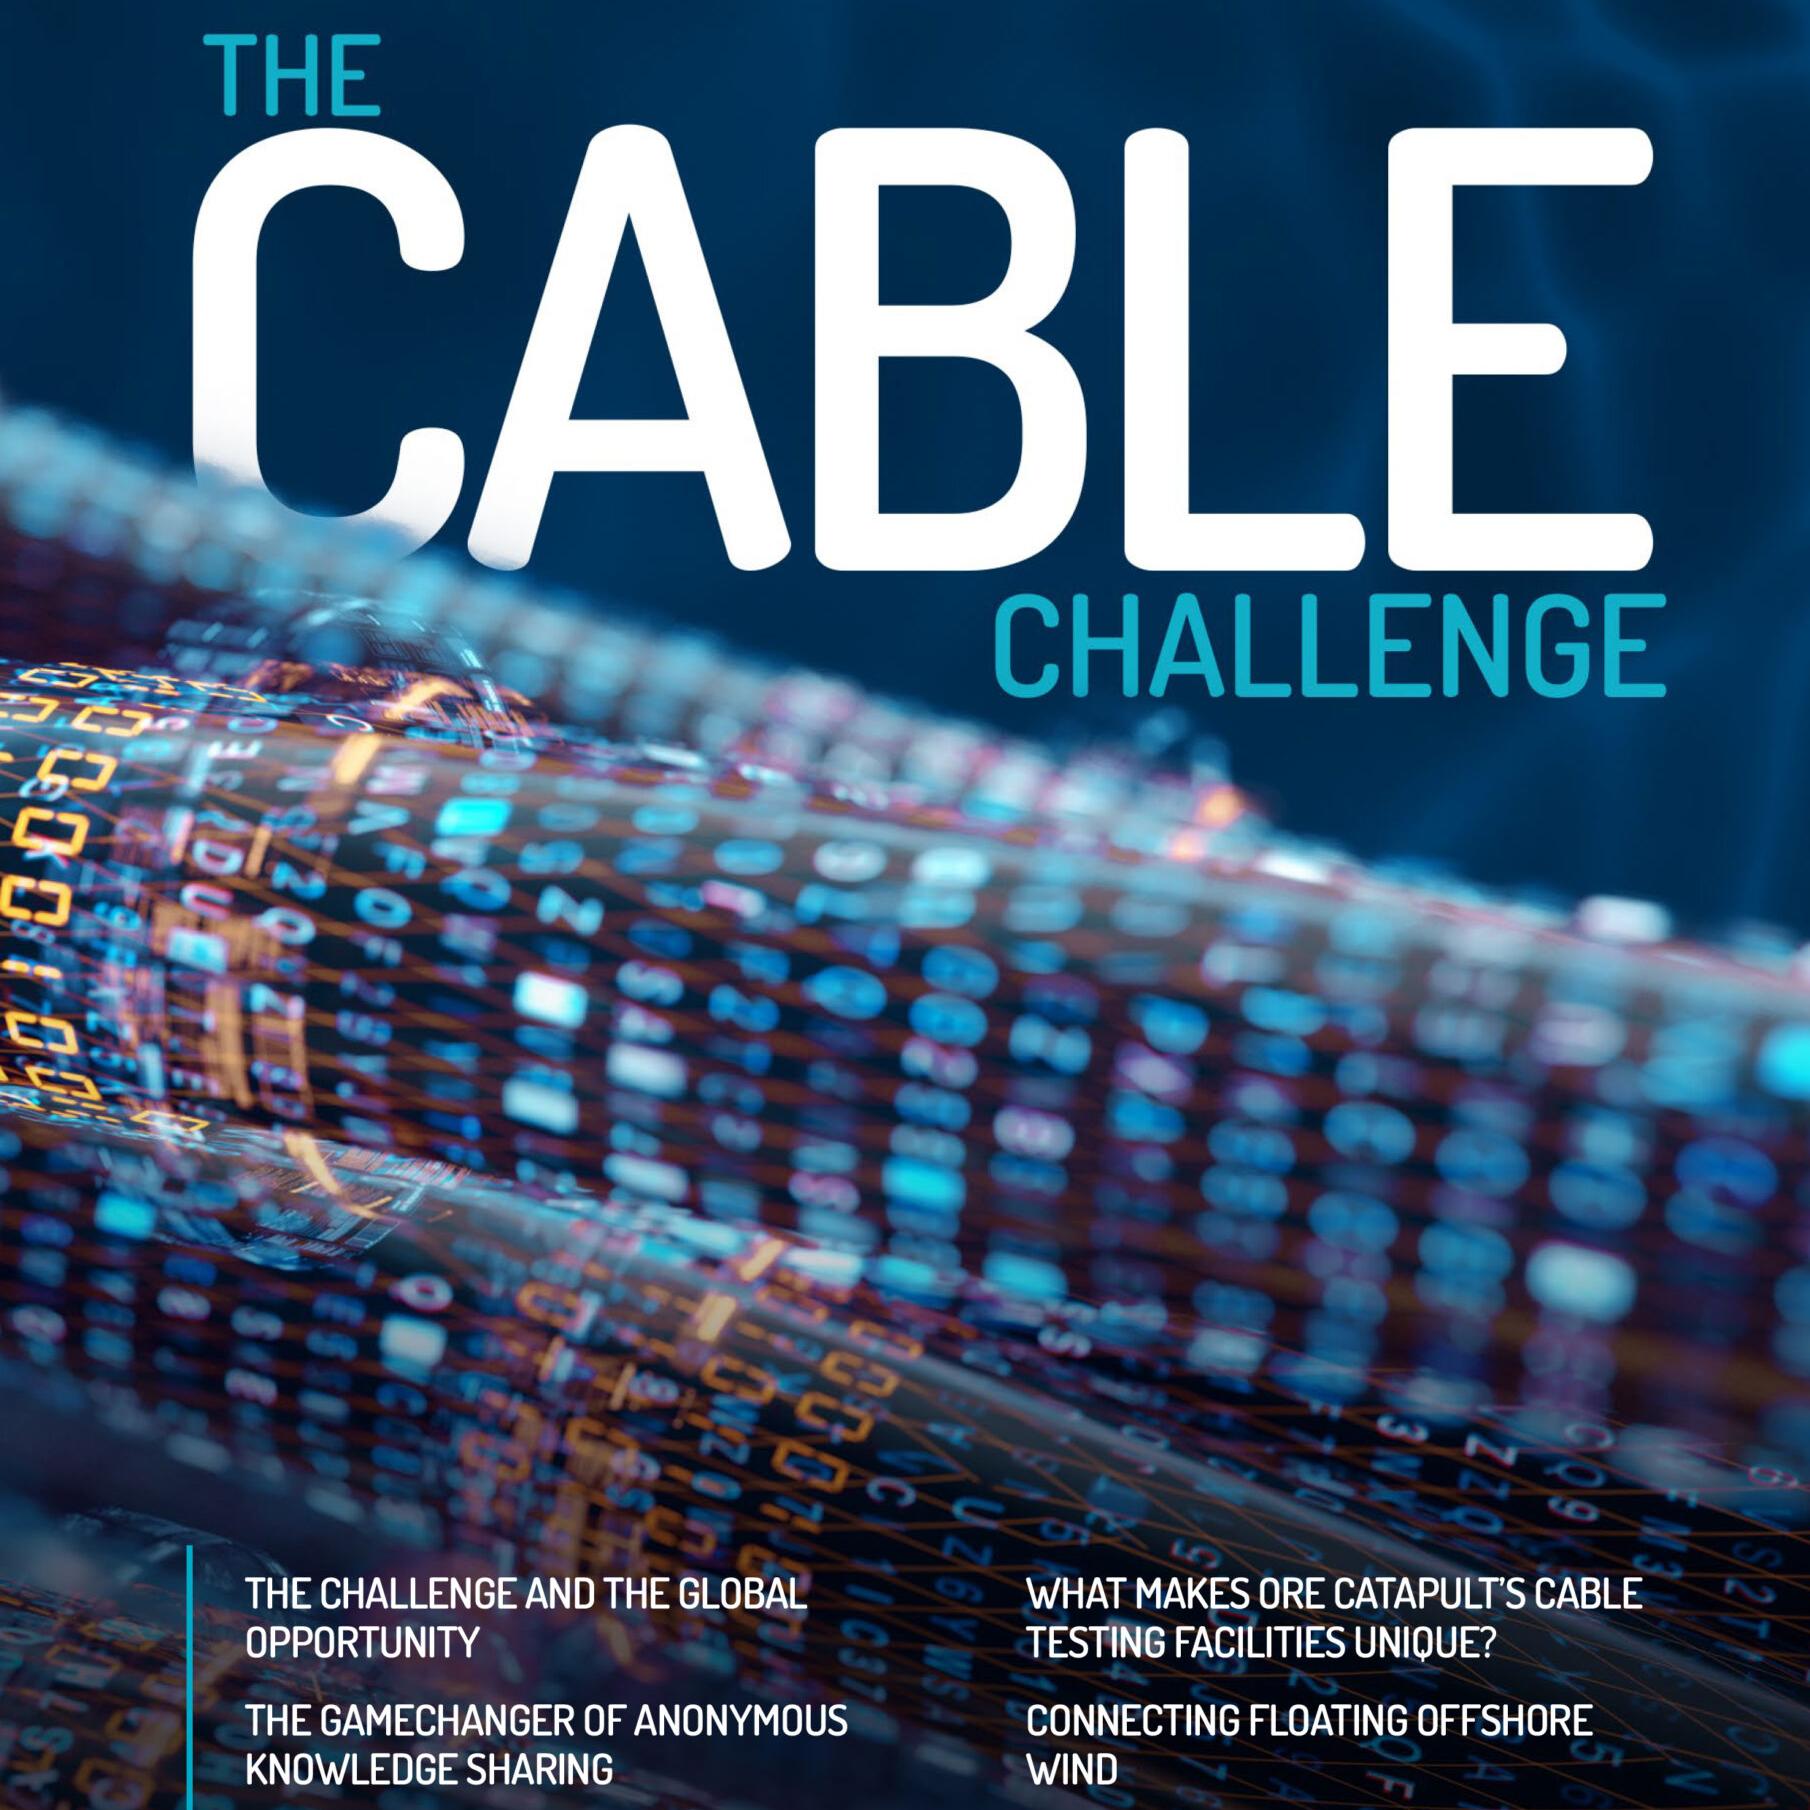 The Cable Challenge